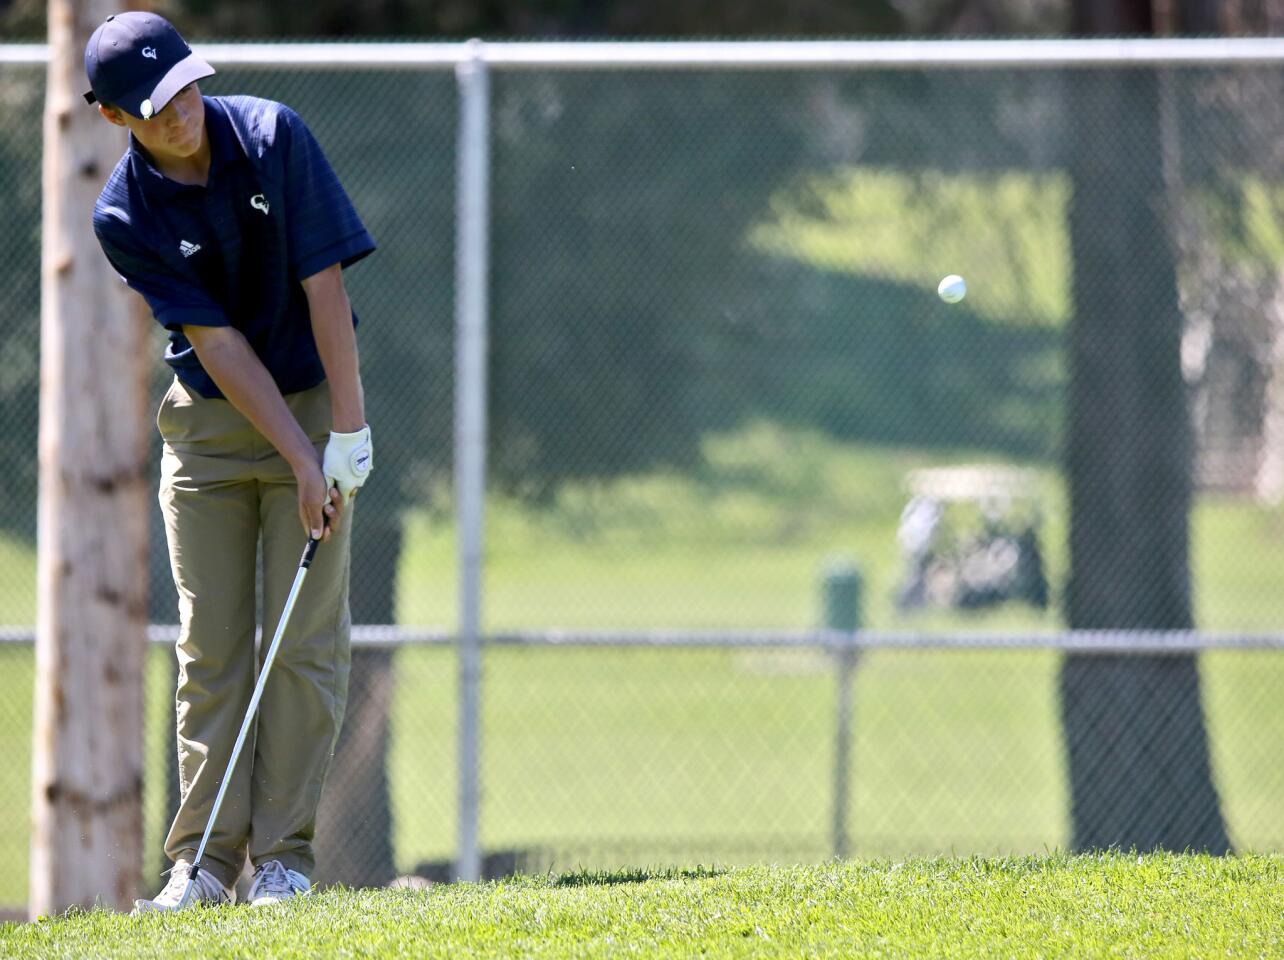 Crescenta Valley High School freshman Hank Norman makes par with a 35-yard chip into the cup from outside the green, in the second hole of Pacific League play at Harding Golf Course in Los Angeles on Thursday, March 14, 2019.